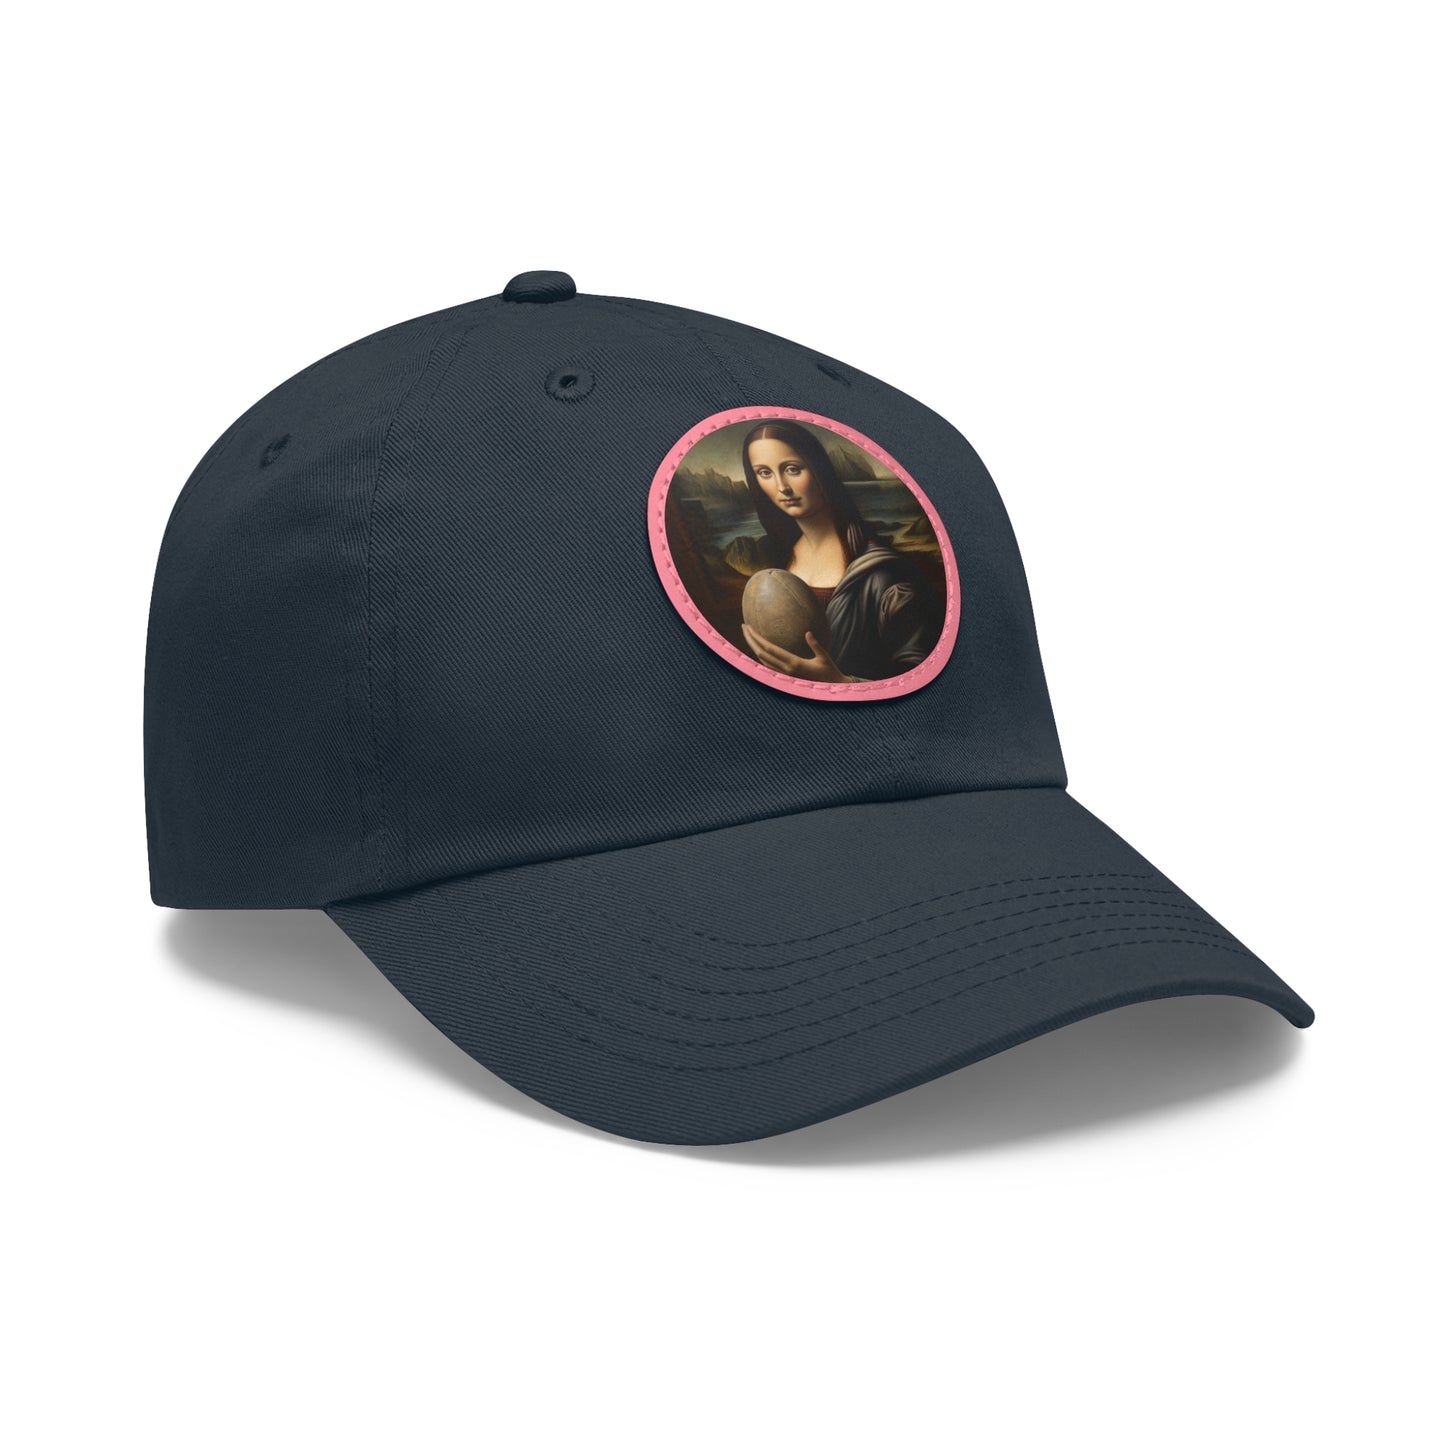 Mona Lisa Rugby hat